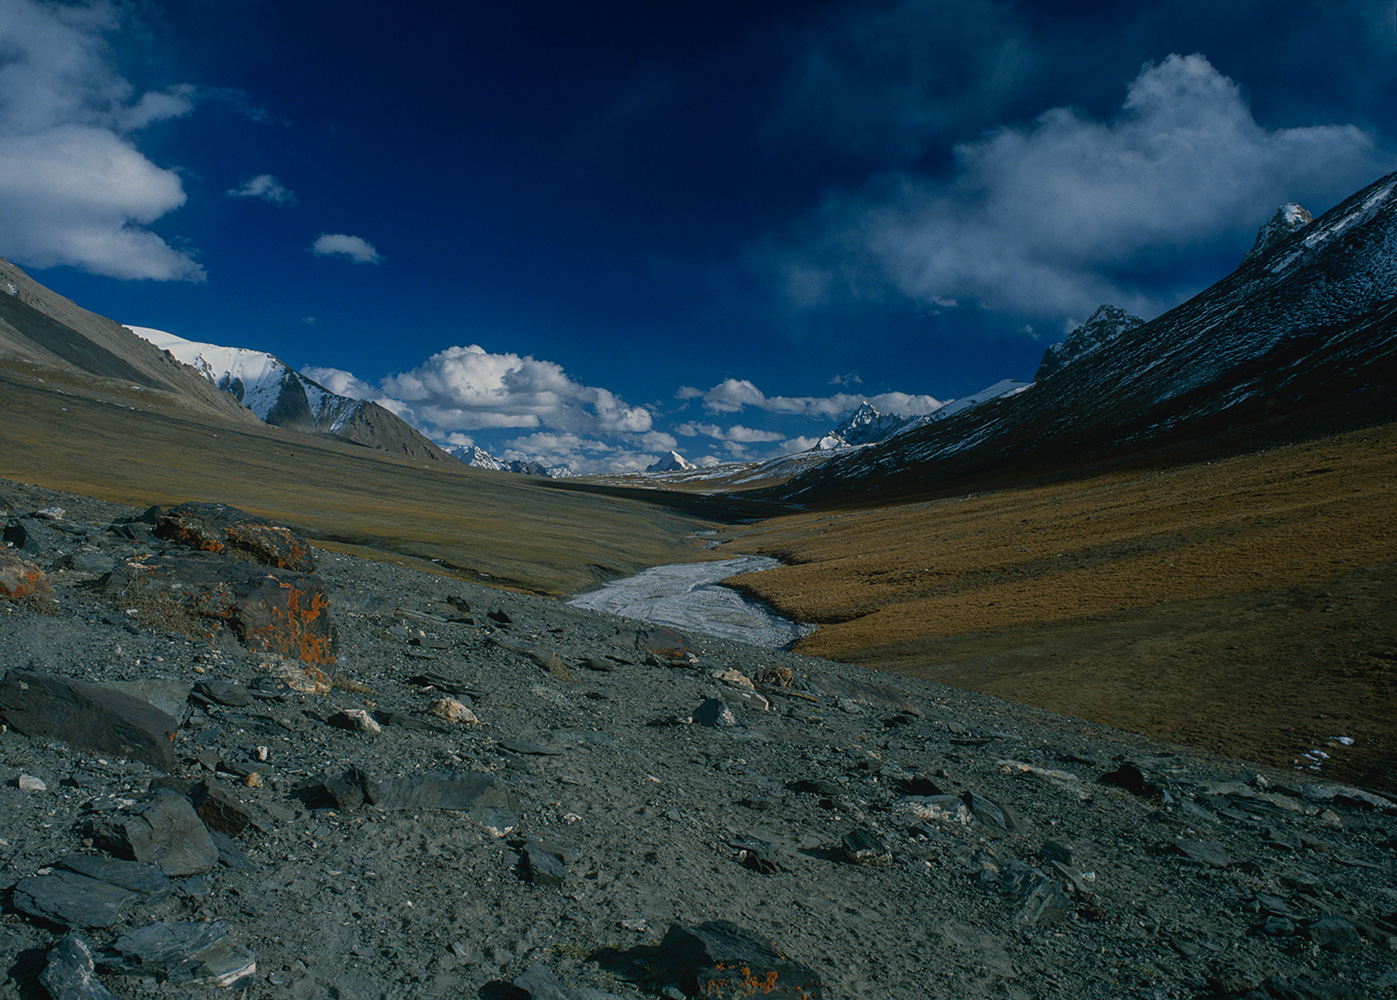 The final spproach to the Shimshal Pass is up this idyllic high altitude valley